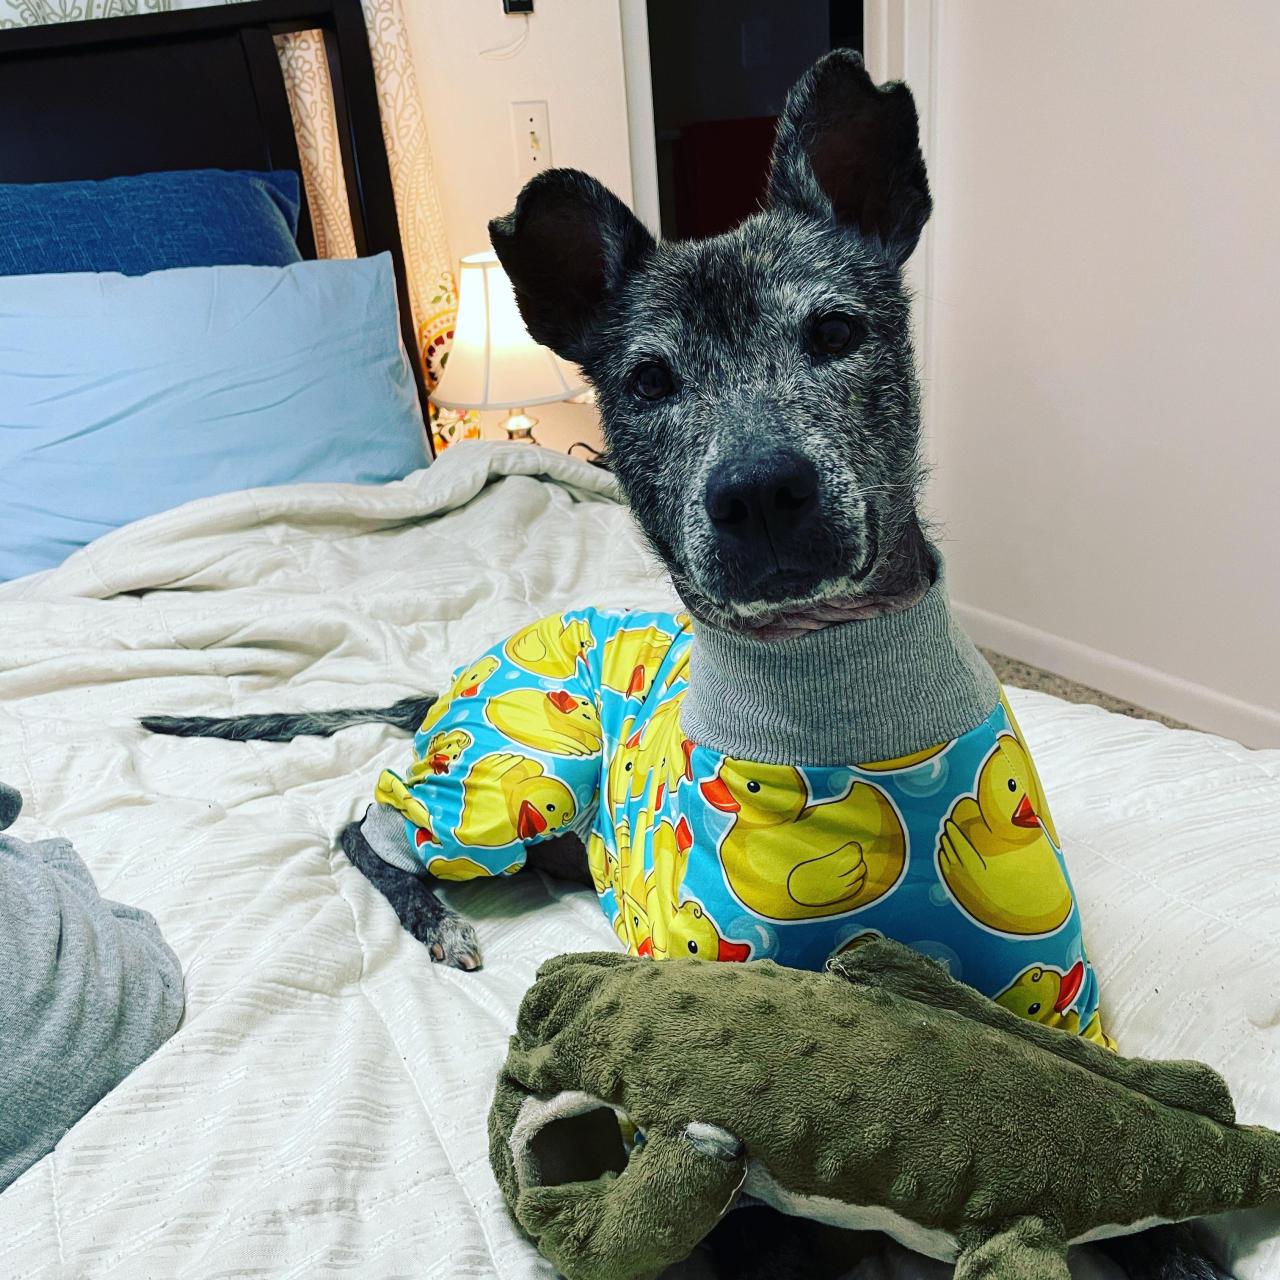 Just my foster dog keeping cozy in her new duckie pajamas